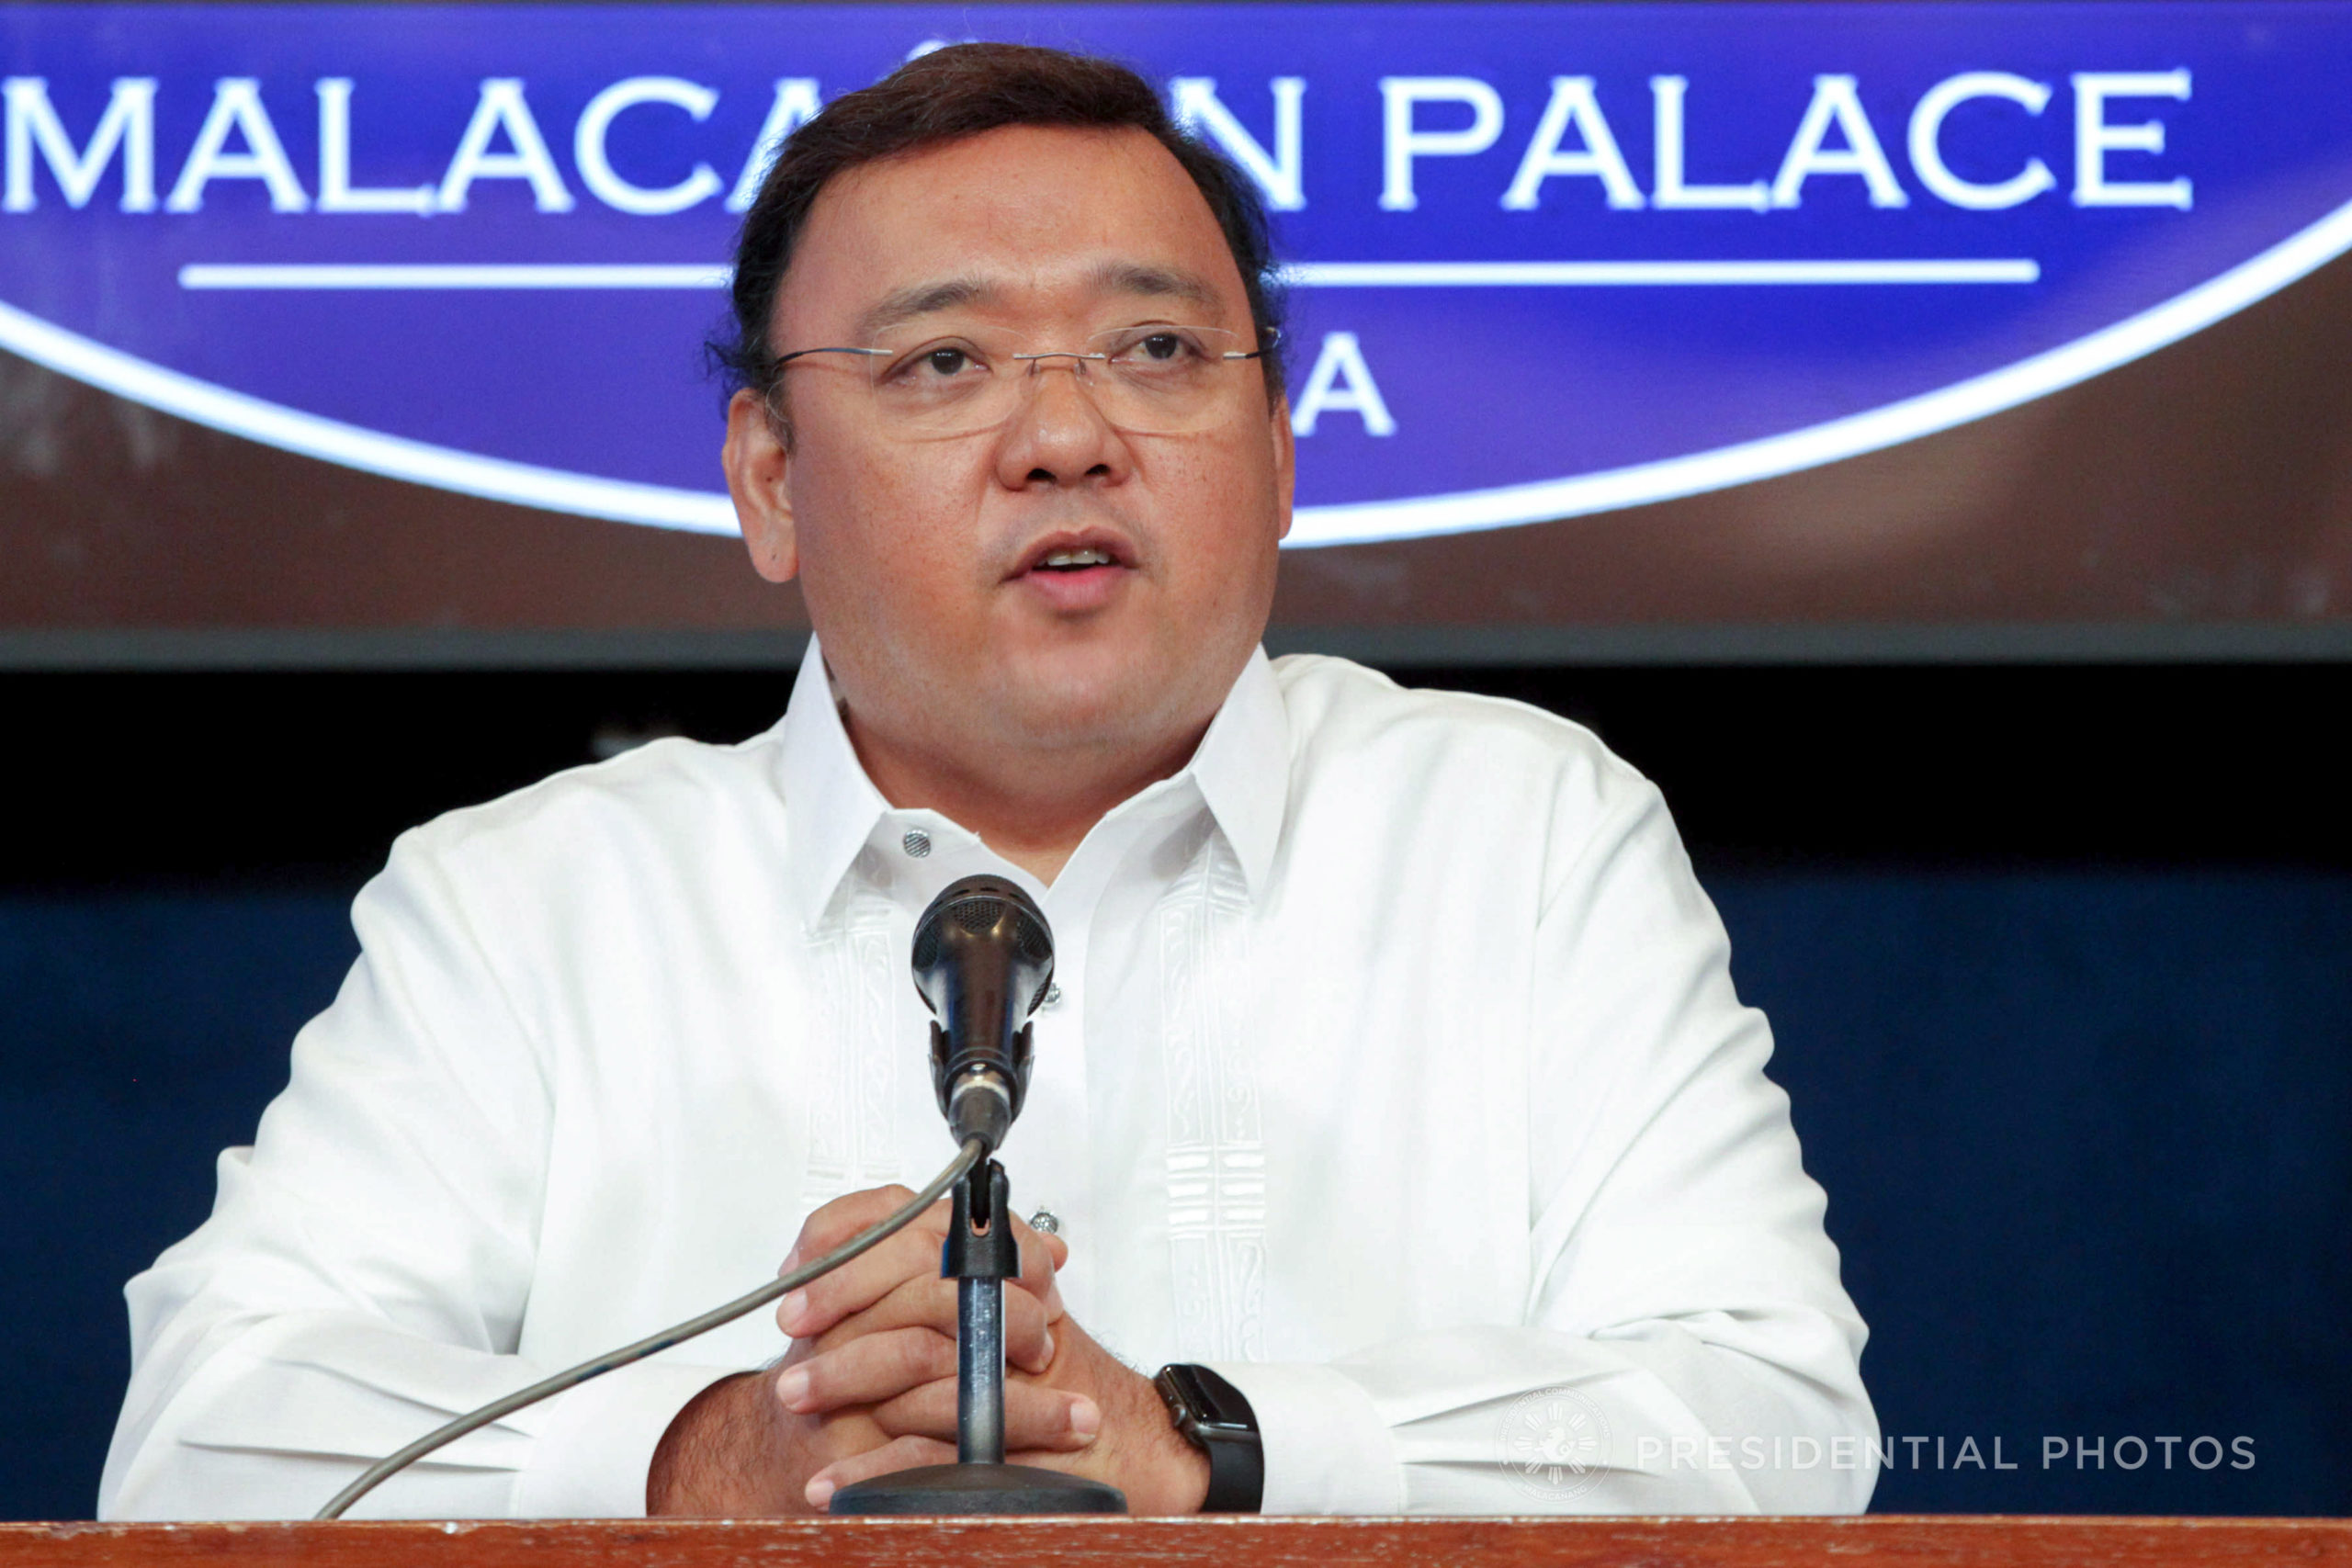 Roque attacked by trolls